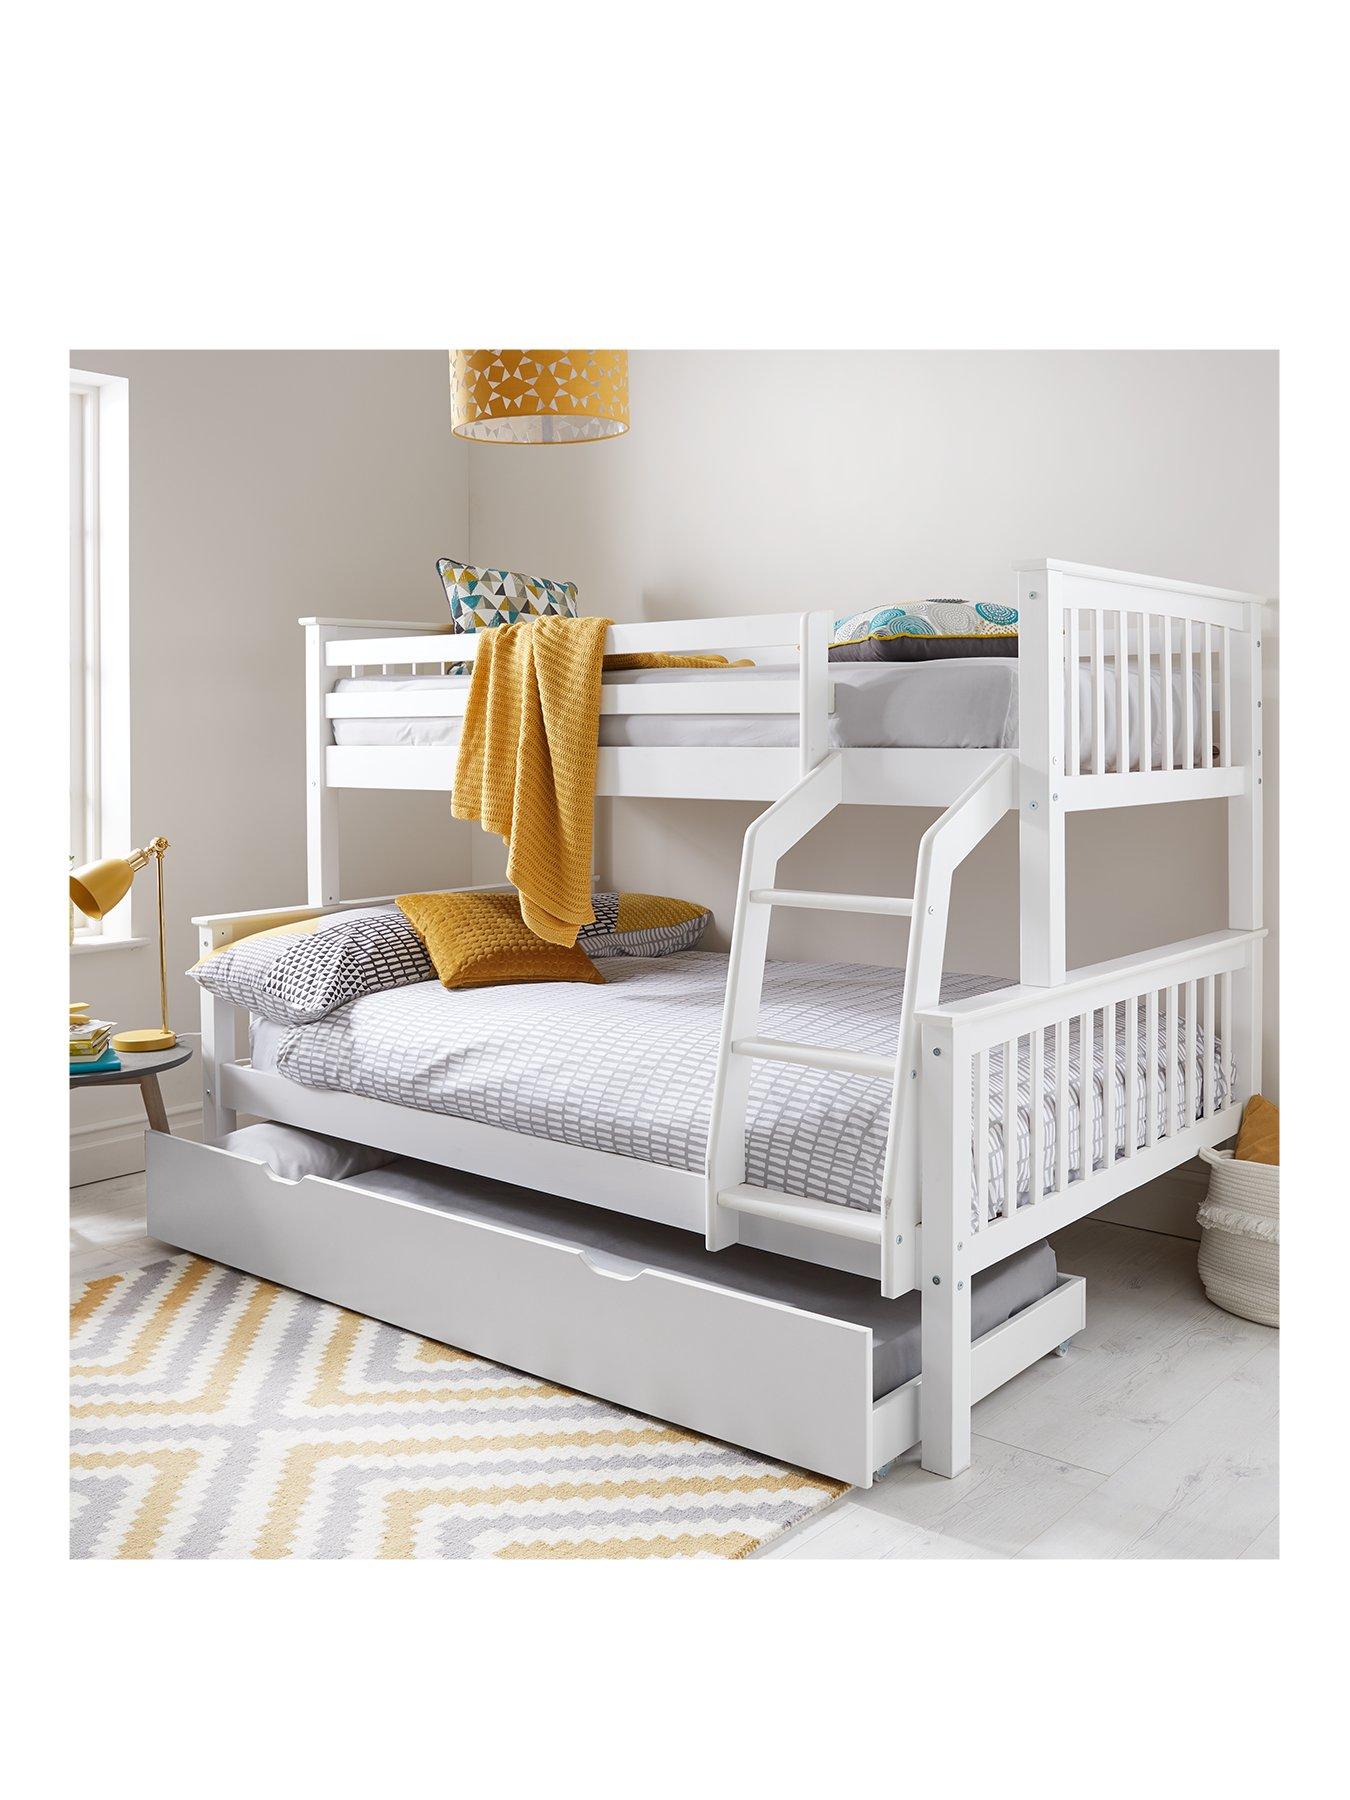 Novara Detachable Trio Bunk Bed In Pine Grey Or White With Optional Mattress